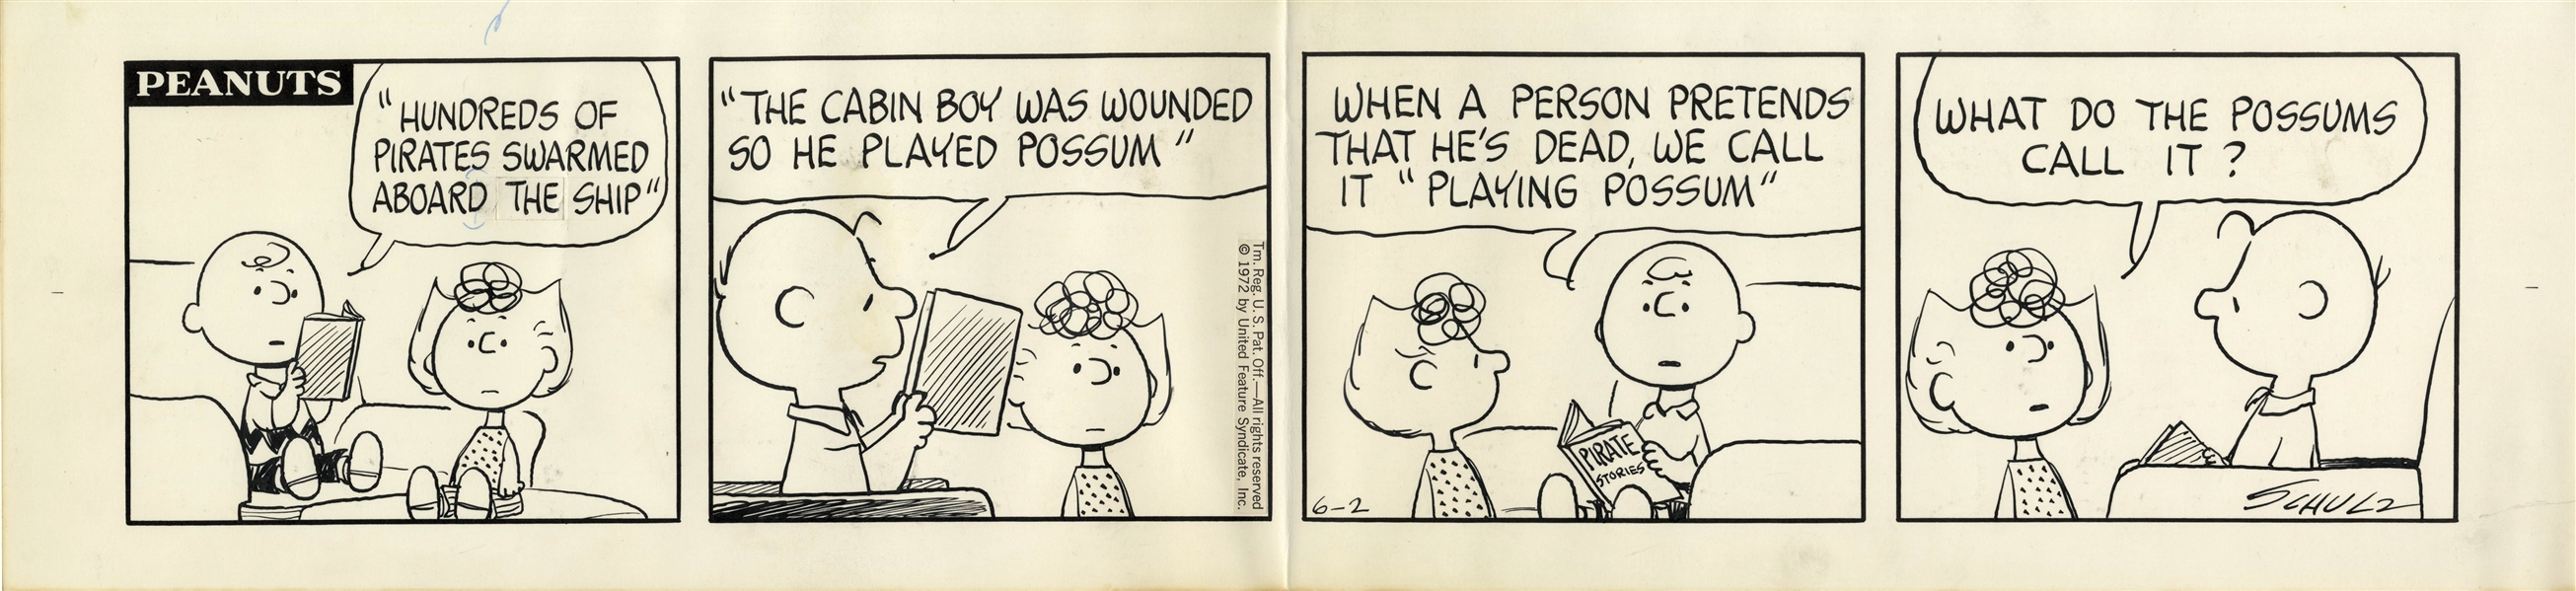 Charlie Brown & Sally Star in This ''Peanuts'' Comic Strip Hand-Drawn by Charles Schulz in 1972 -- Charlie Brown Reads a ''Pirate'' Story to His Sister